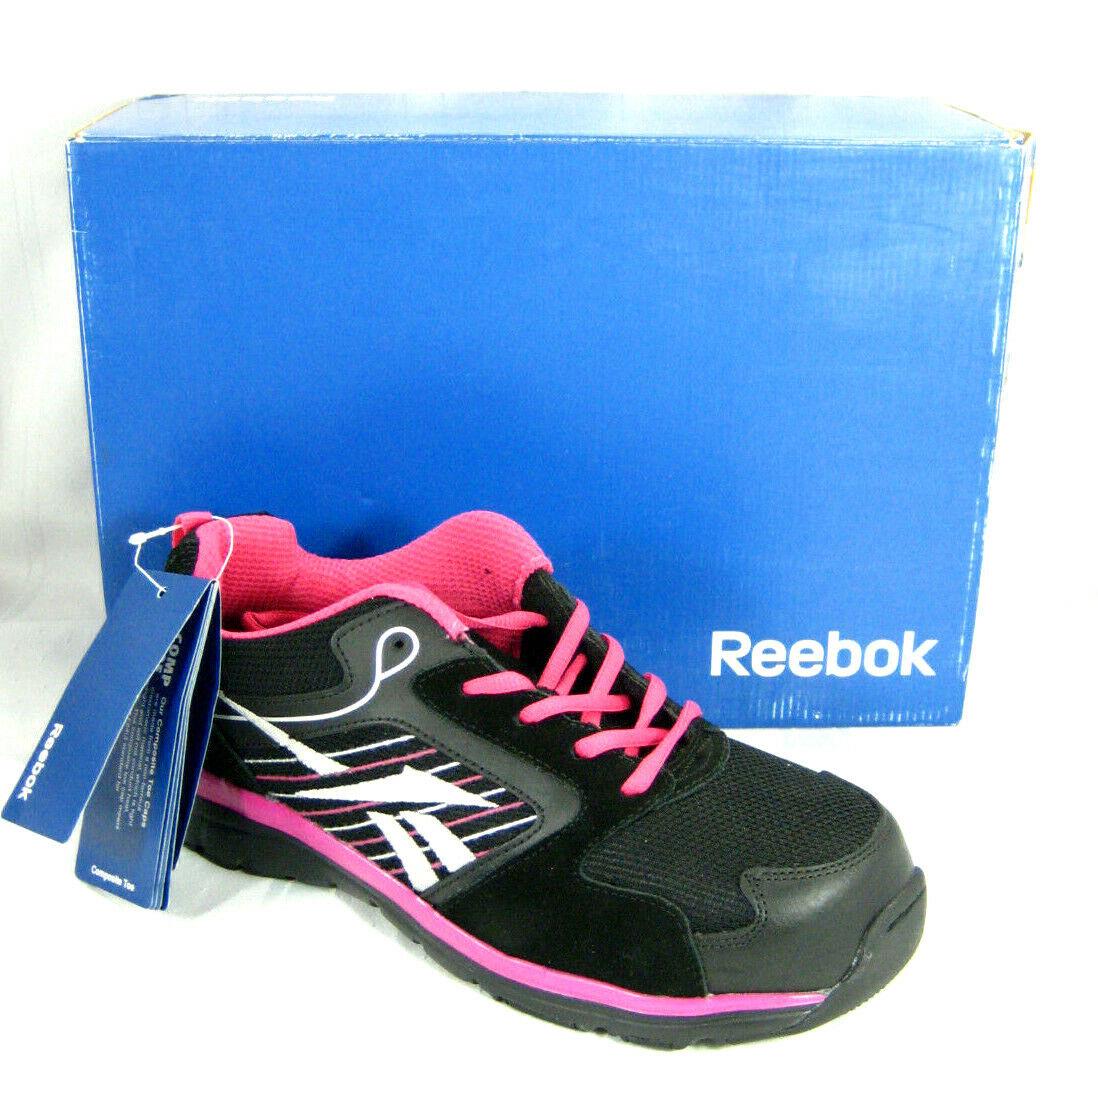 Reebok Womens Black Work Safety Hiking Shoes Composite Toe Sz 10 M Anomar RB454